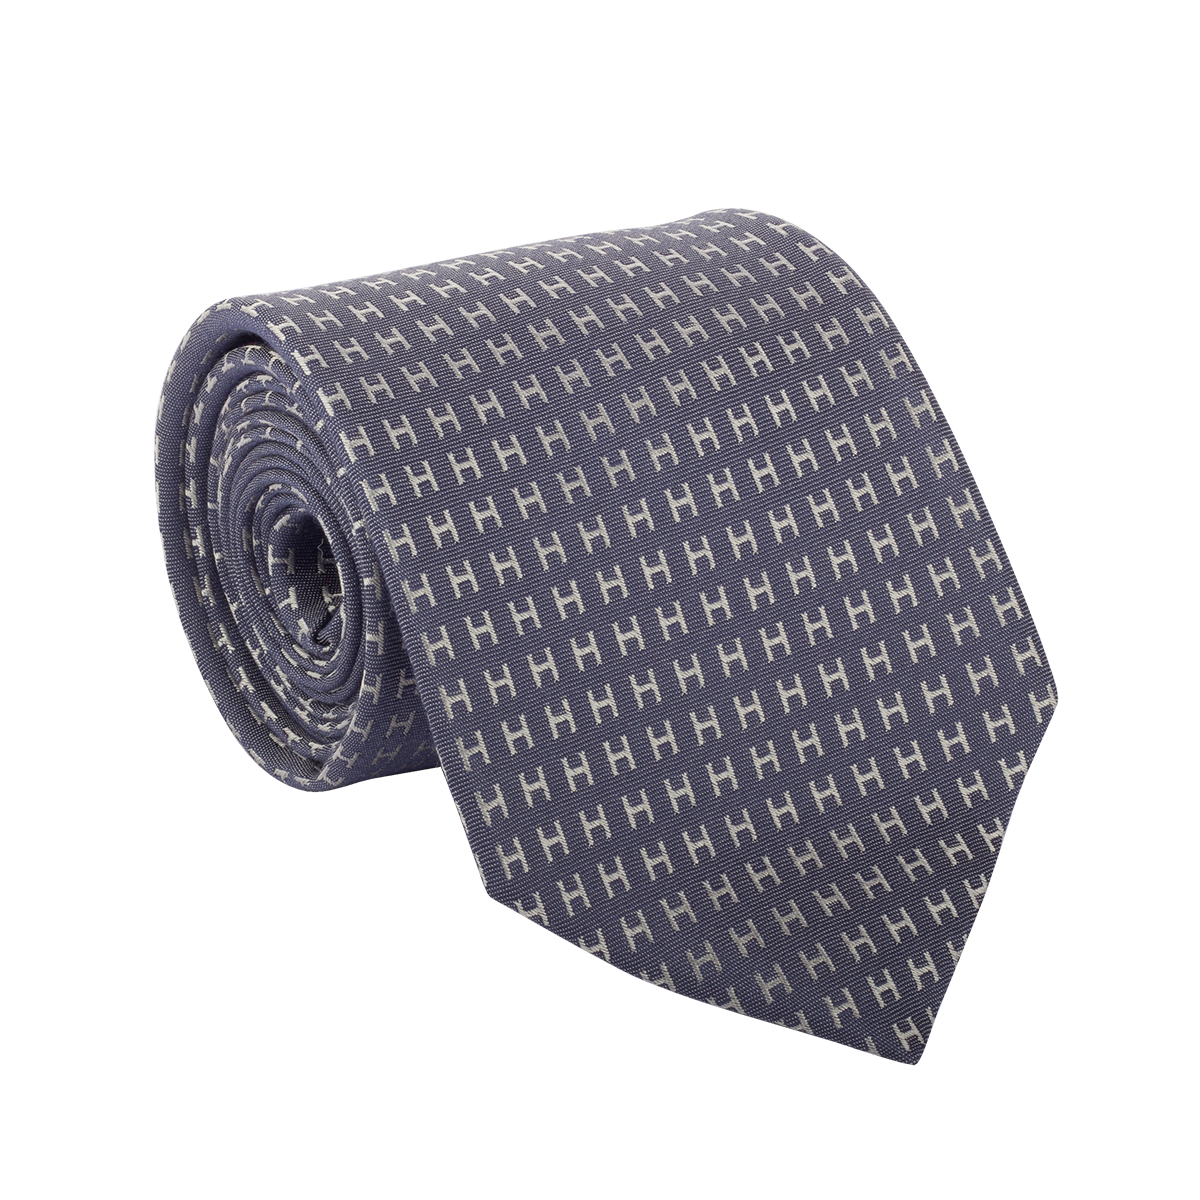 The Stylish Hermes Blue Tie